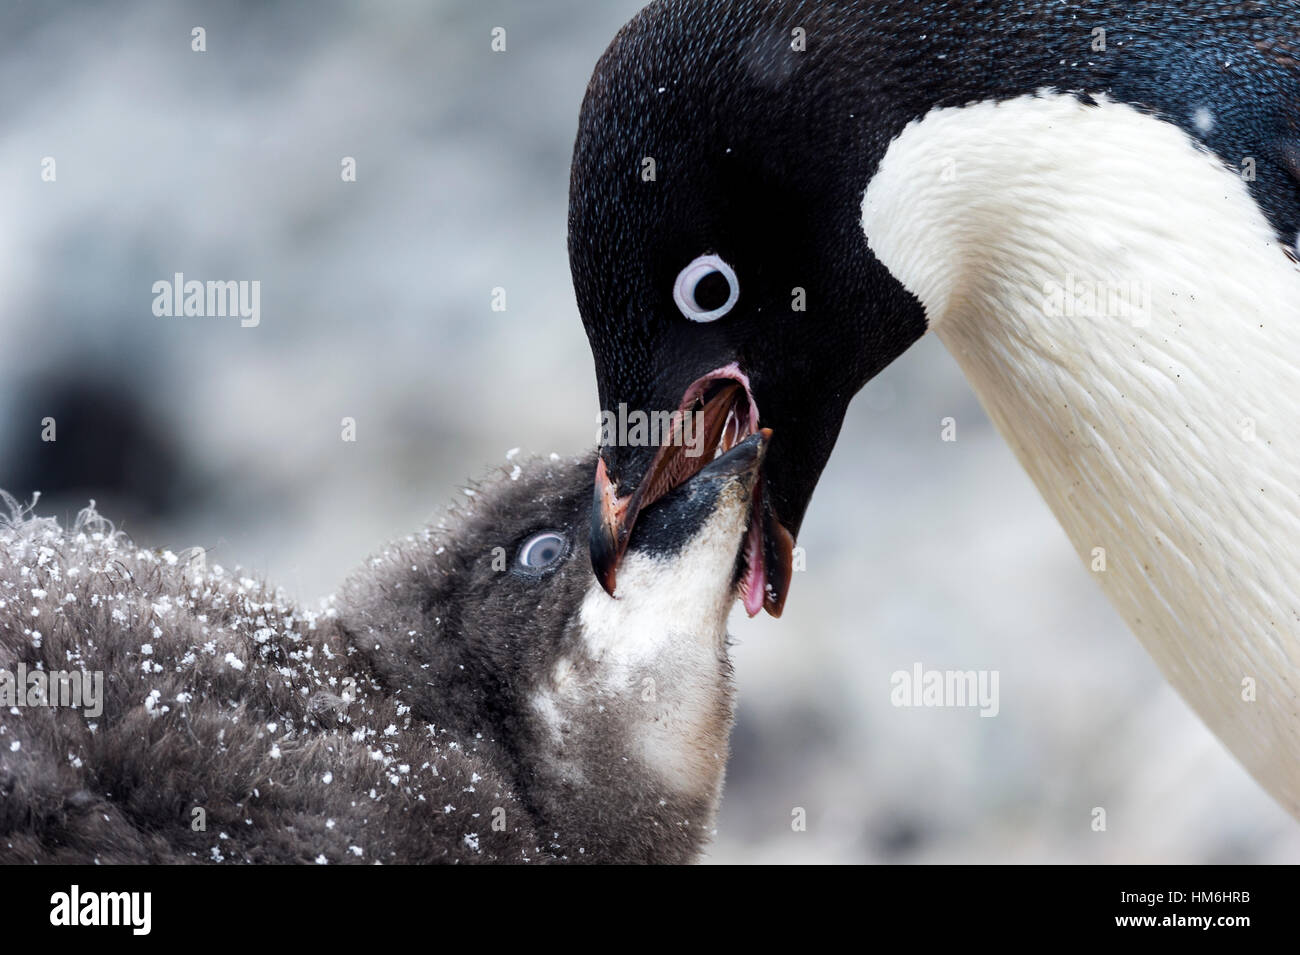 An Adelie Penguin feeding a large fluffy chick by regurgitating food. Stock Photo